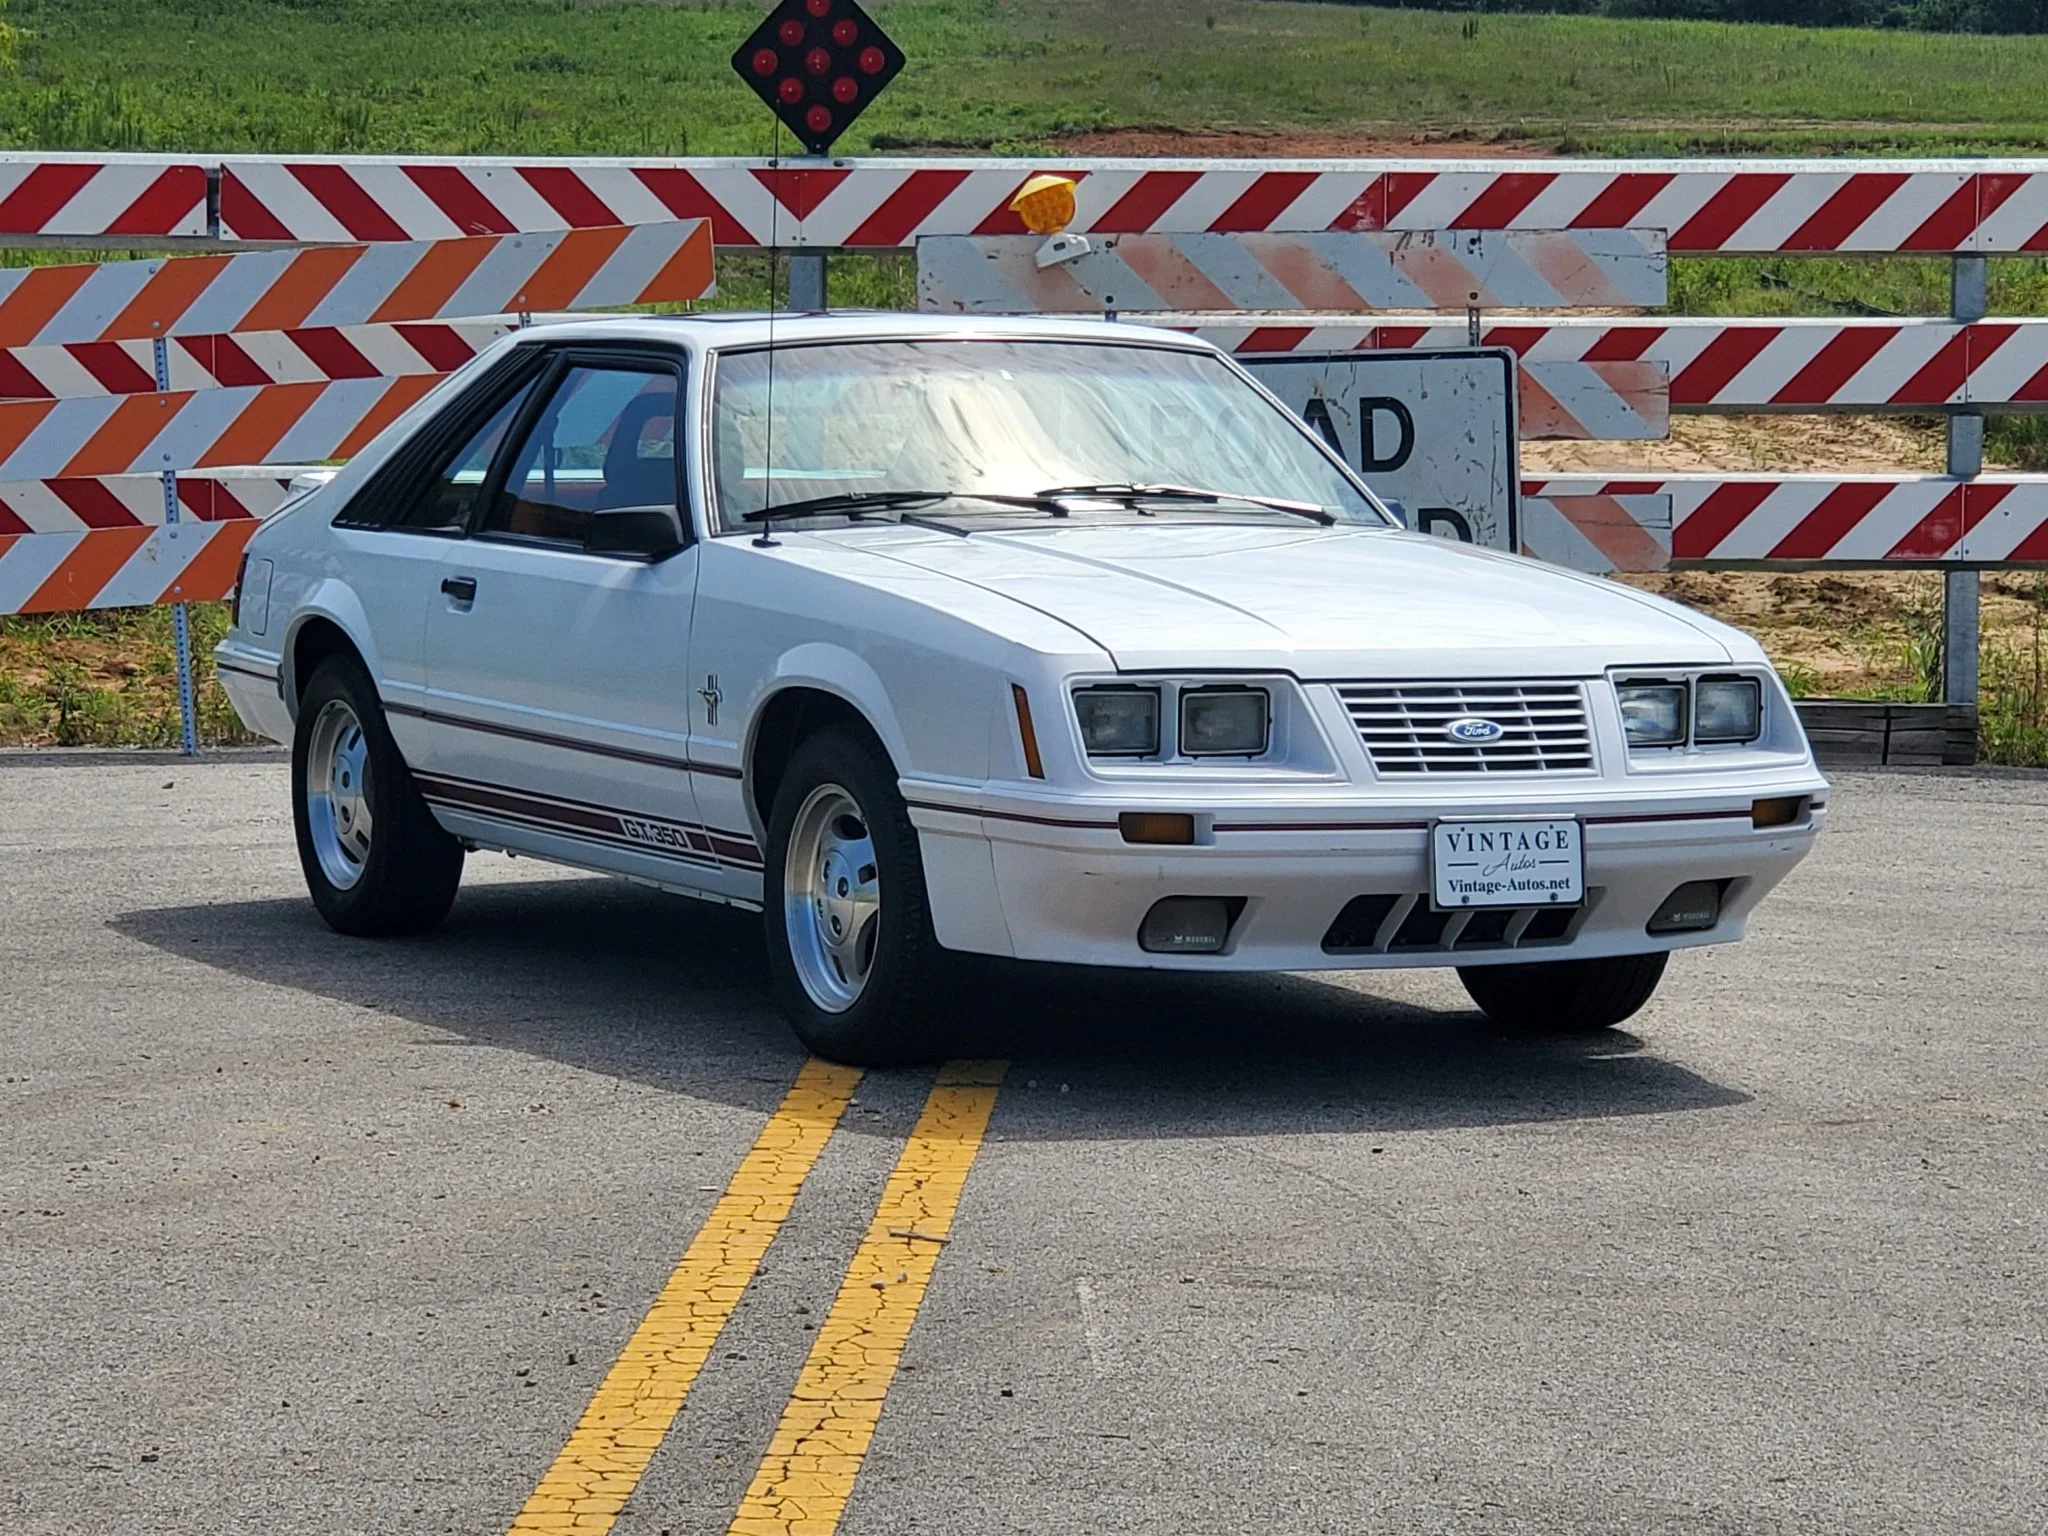 Mustang Of The Day: 1984 Ford Mustang GT350 20th Anniversary Edition